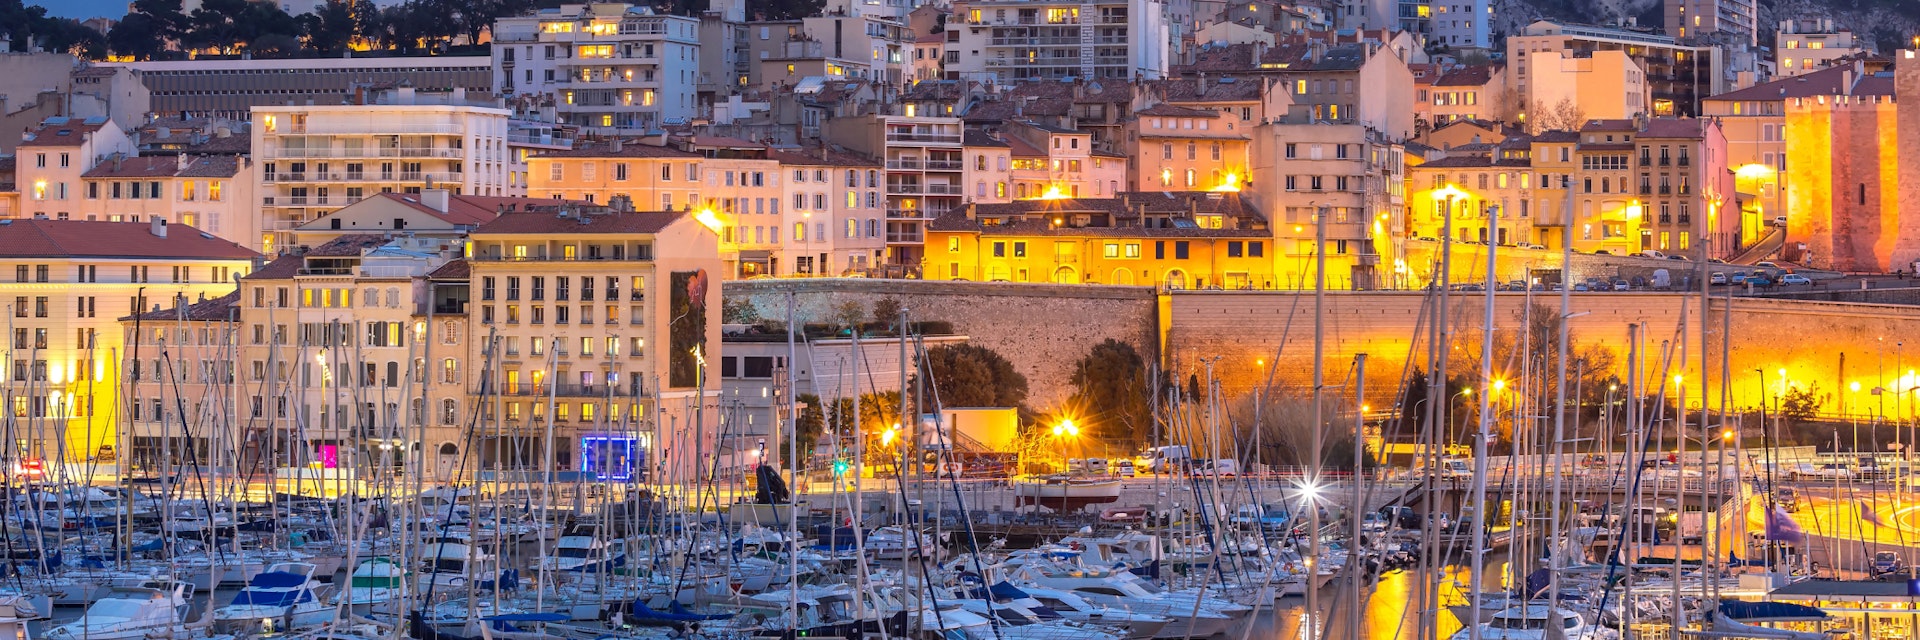 Marseille, France at night. The famous european harbour view on the Notre Dame de la Garde; Shutterstock ID 422043877; Your name (First / Last): redownload; GL account no.: redownload; Netsuite department name: redownload; Full Product or Project name including edition: redownload